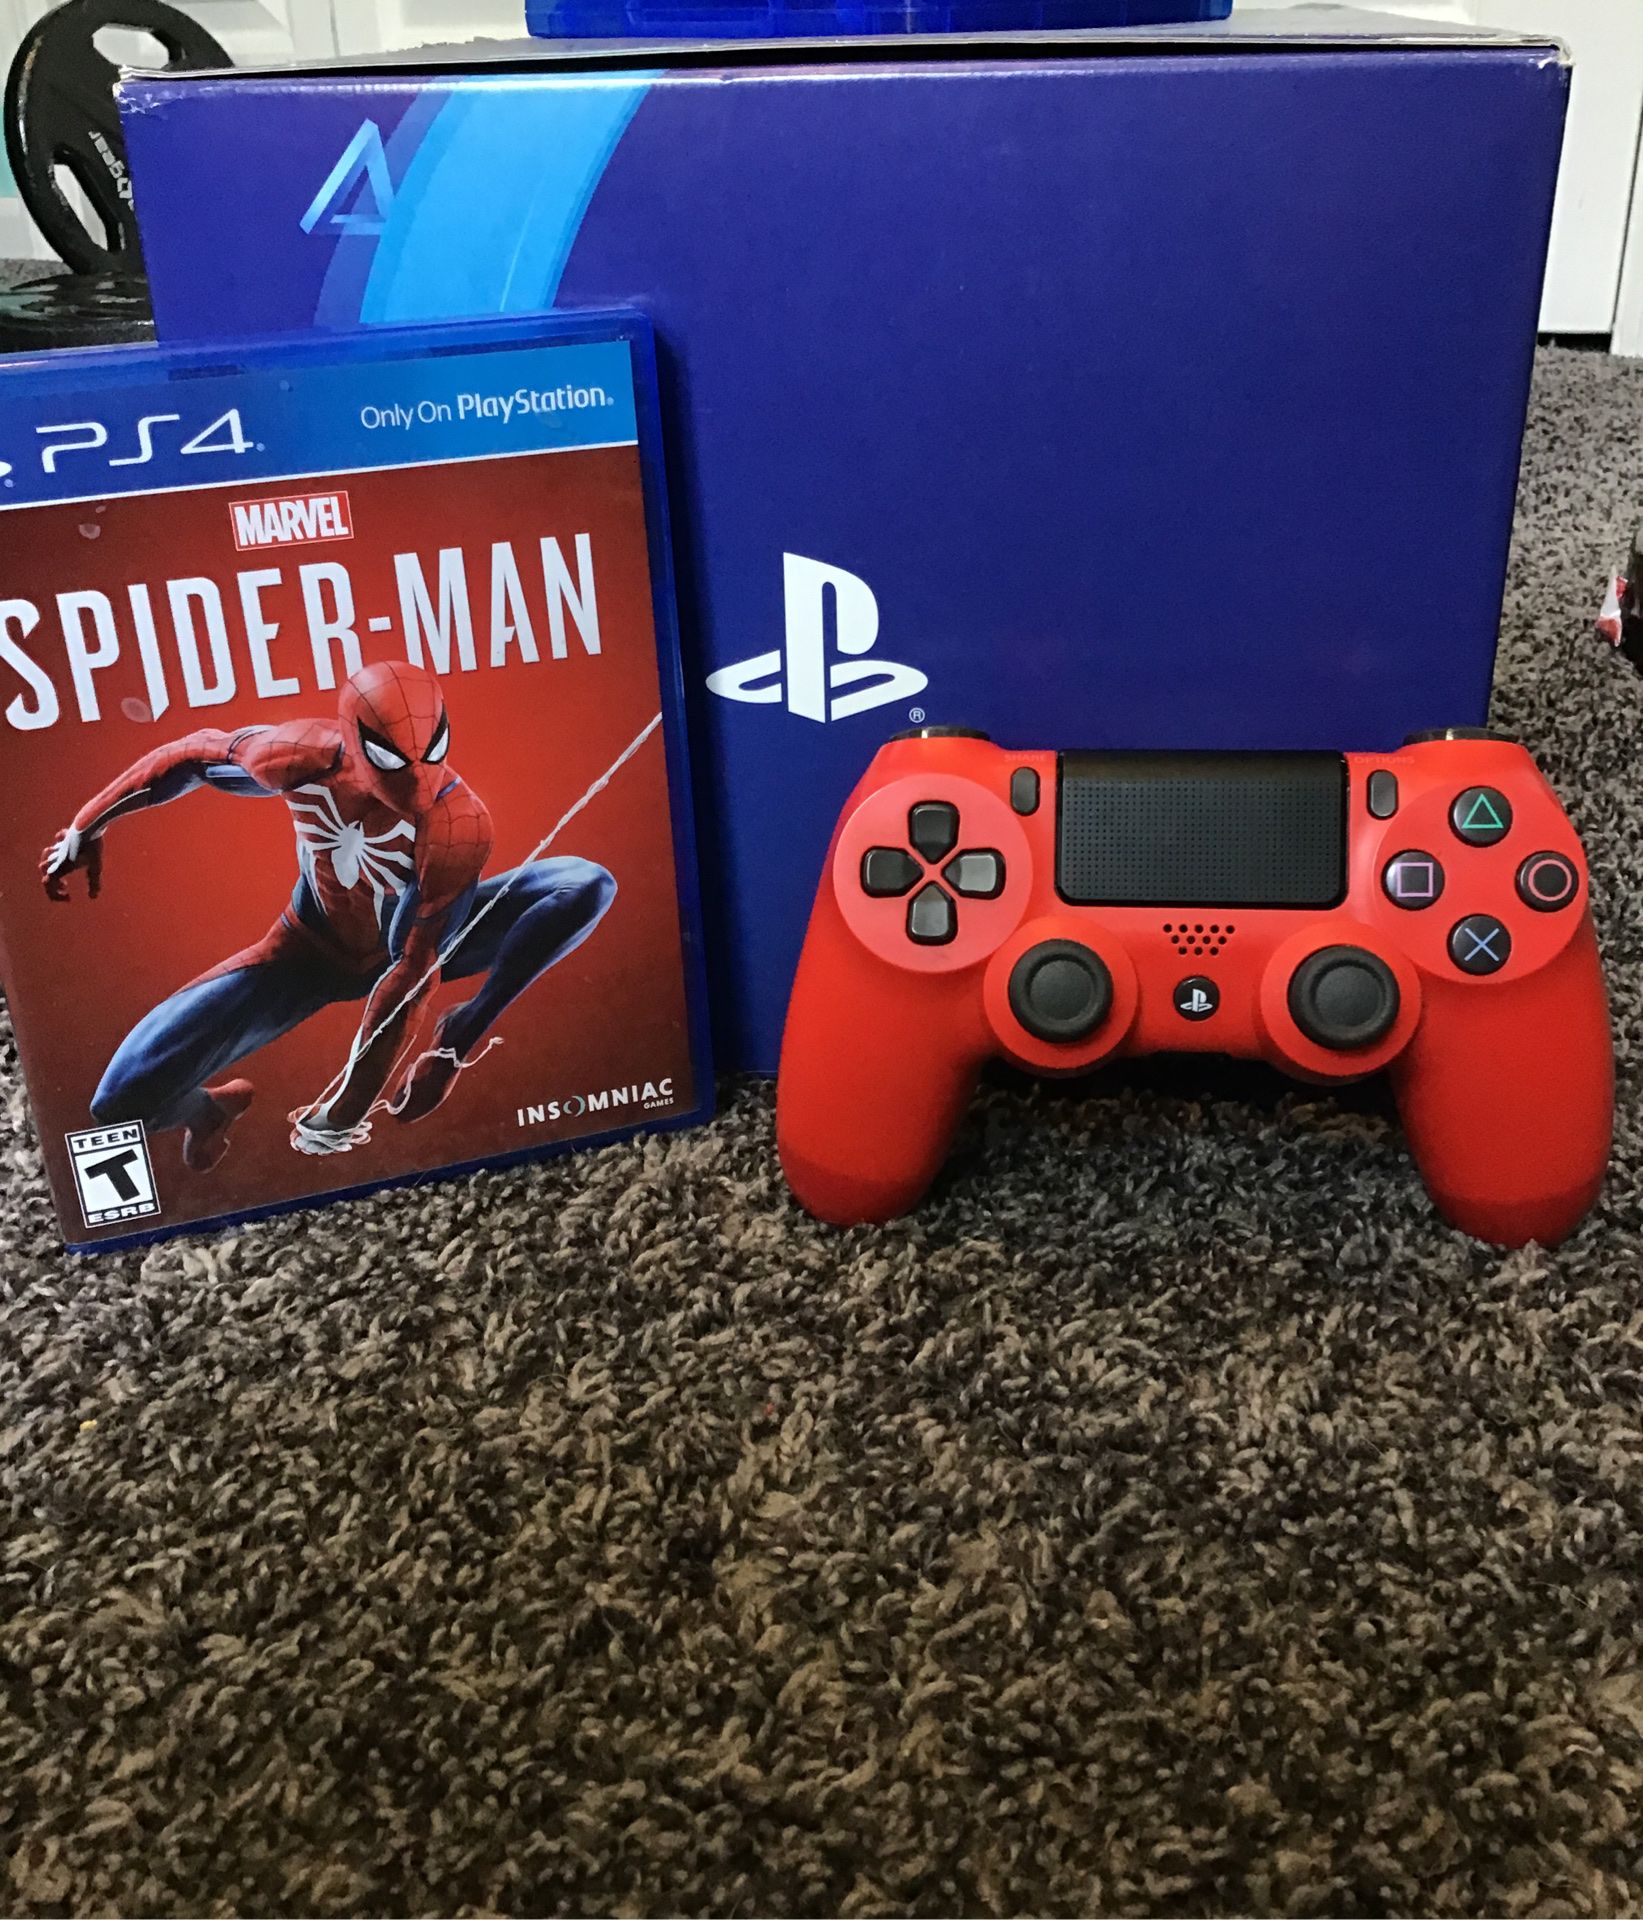 Spider-Man game and Red PS4 controller.